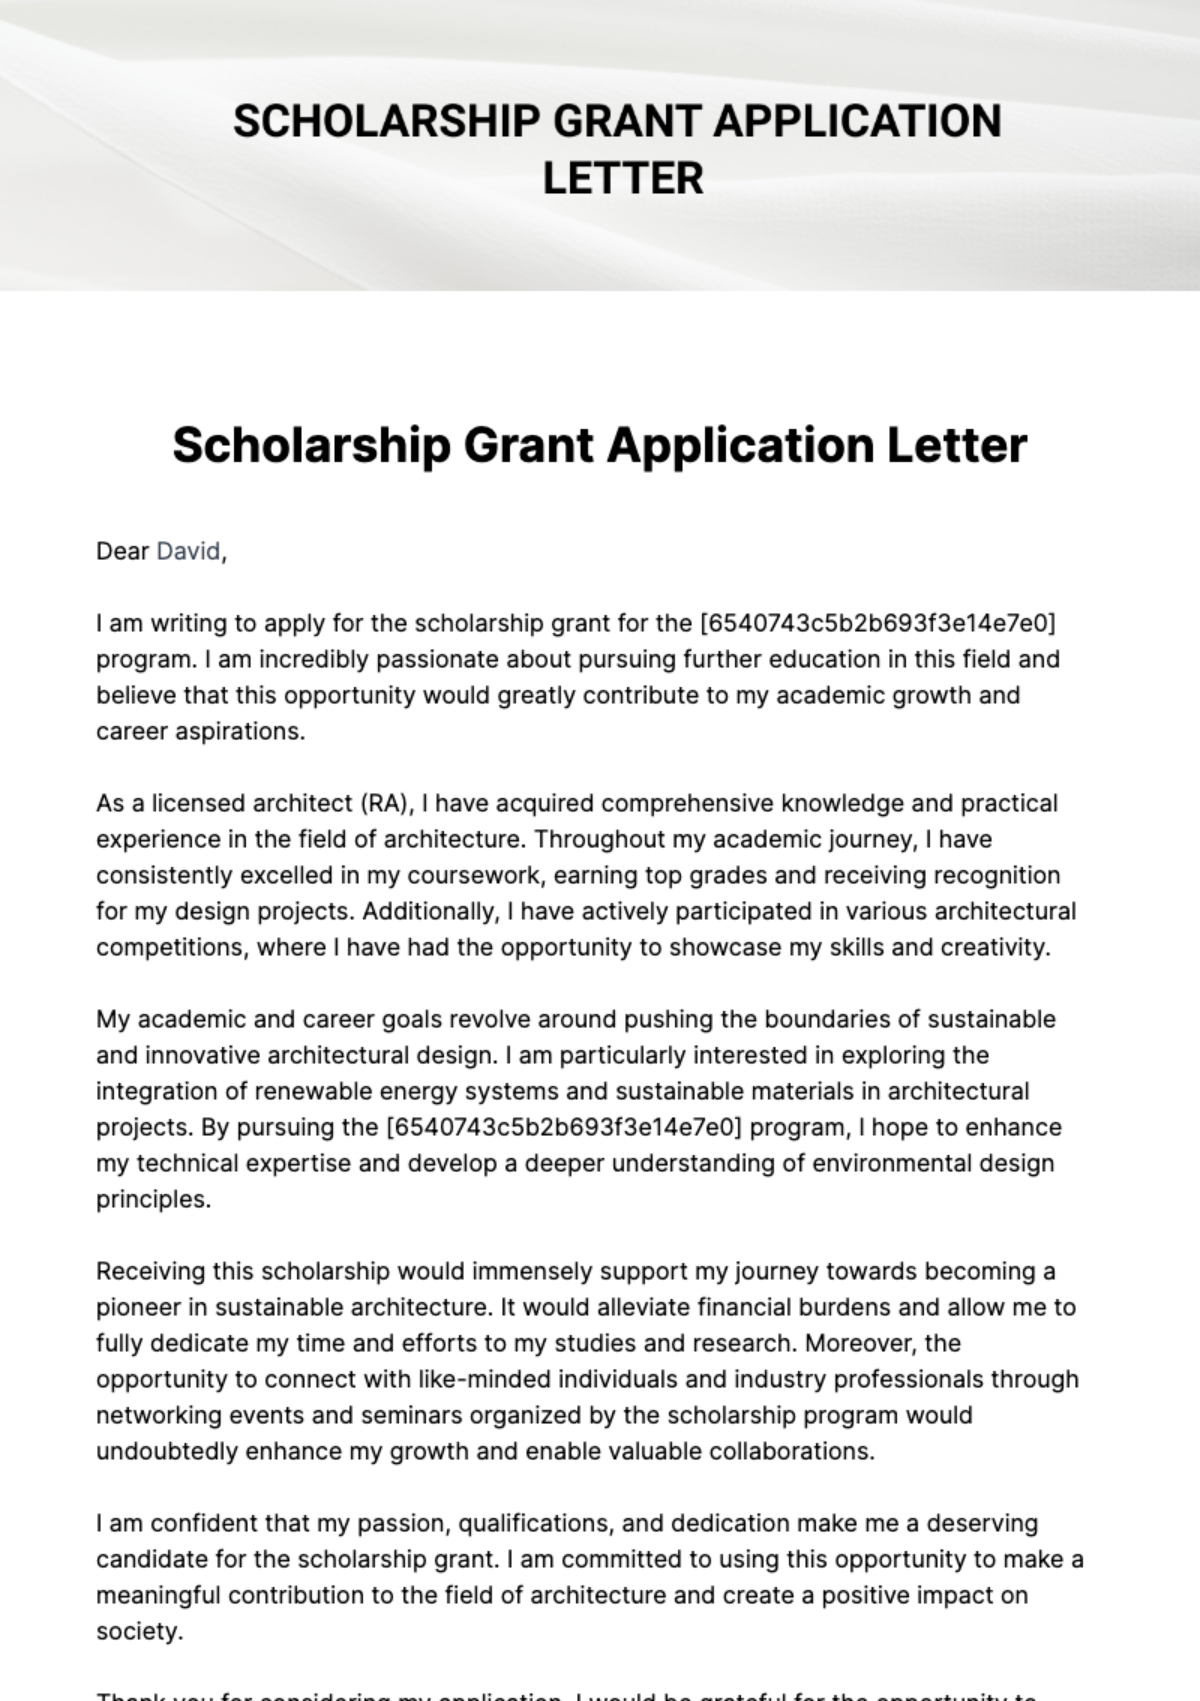 Free Scholarship Grant Application Letter Template